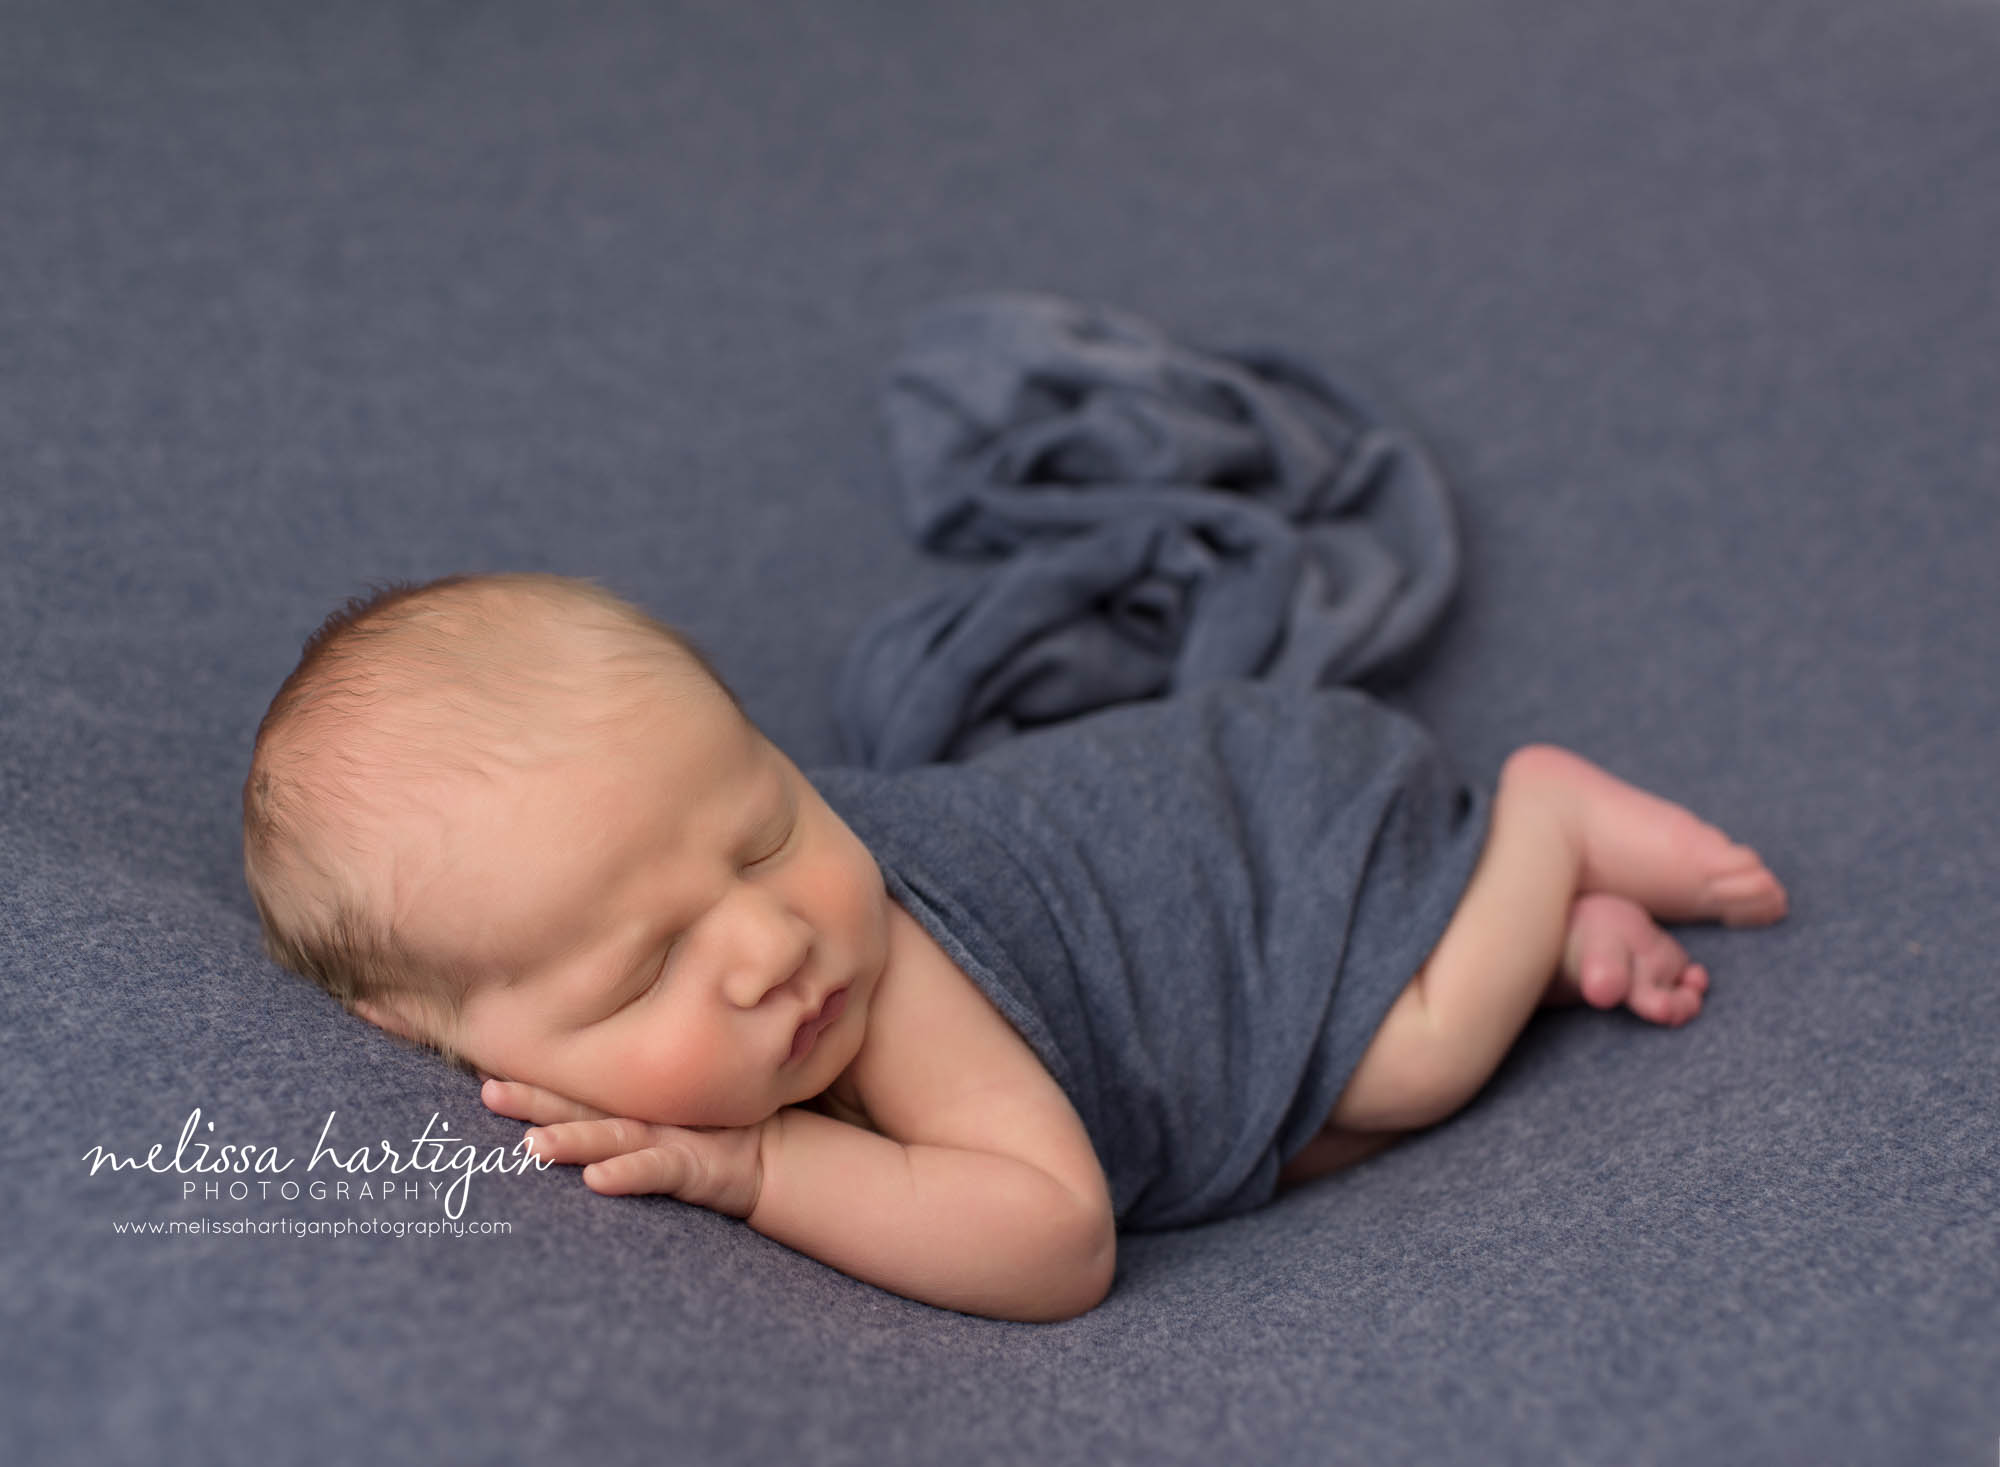 Newborn baby boy posed on side with blue layer wrap draped over New milford newborn Photographer